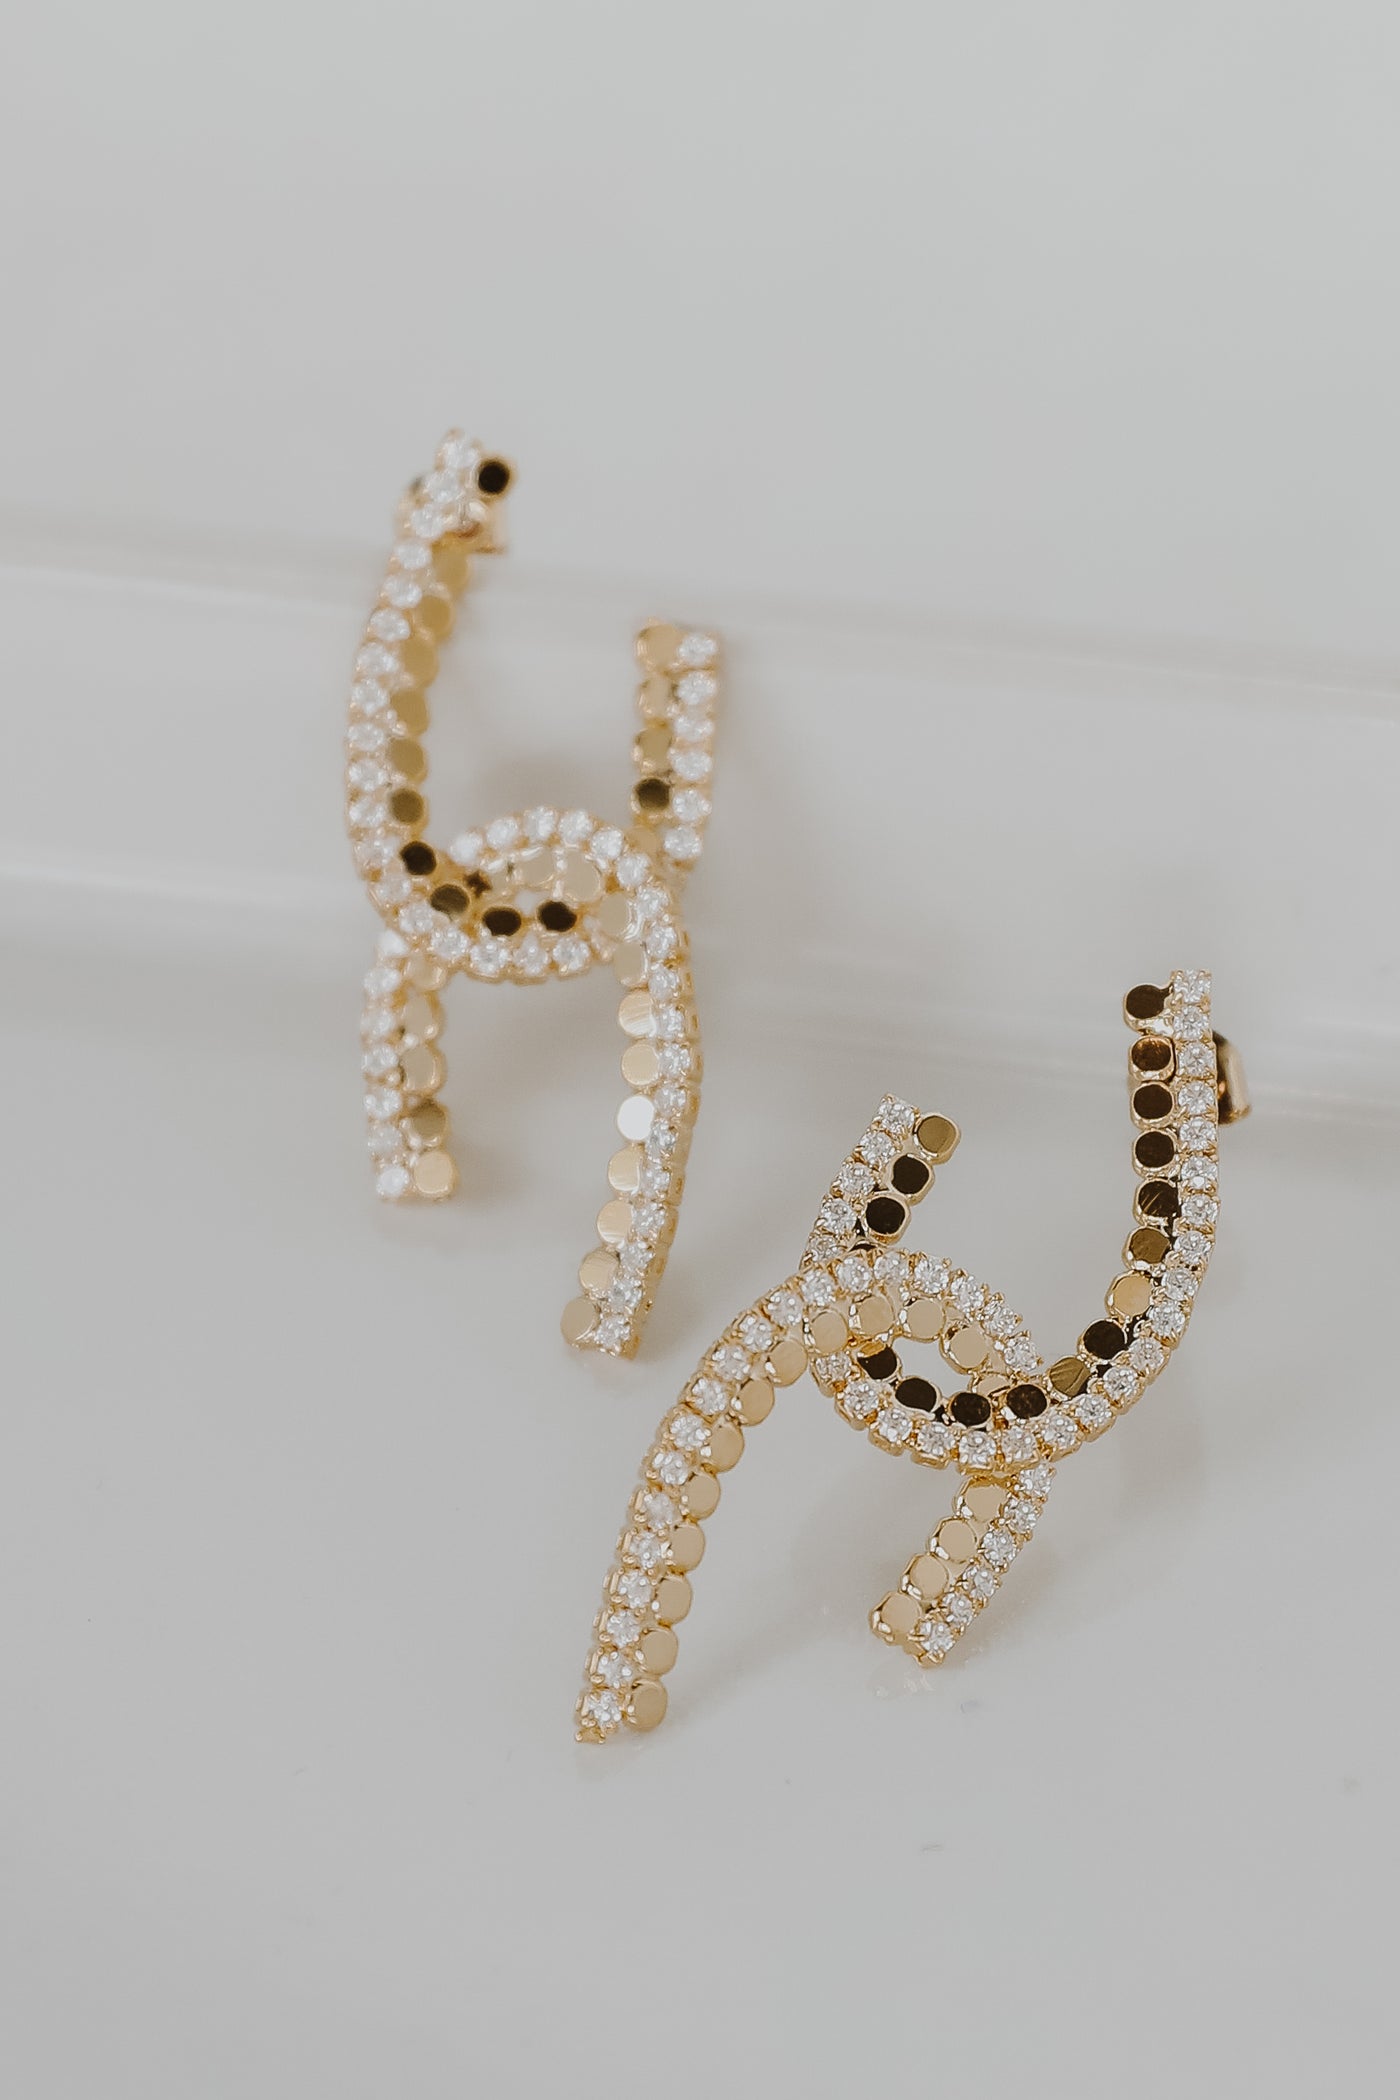 Gold Rhinestone Statement Earrings from dress up